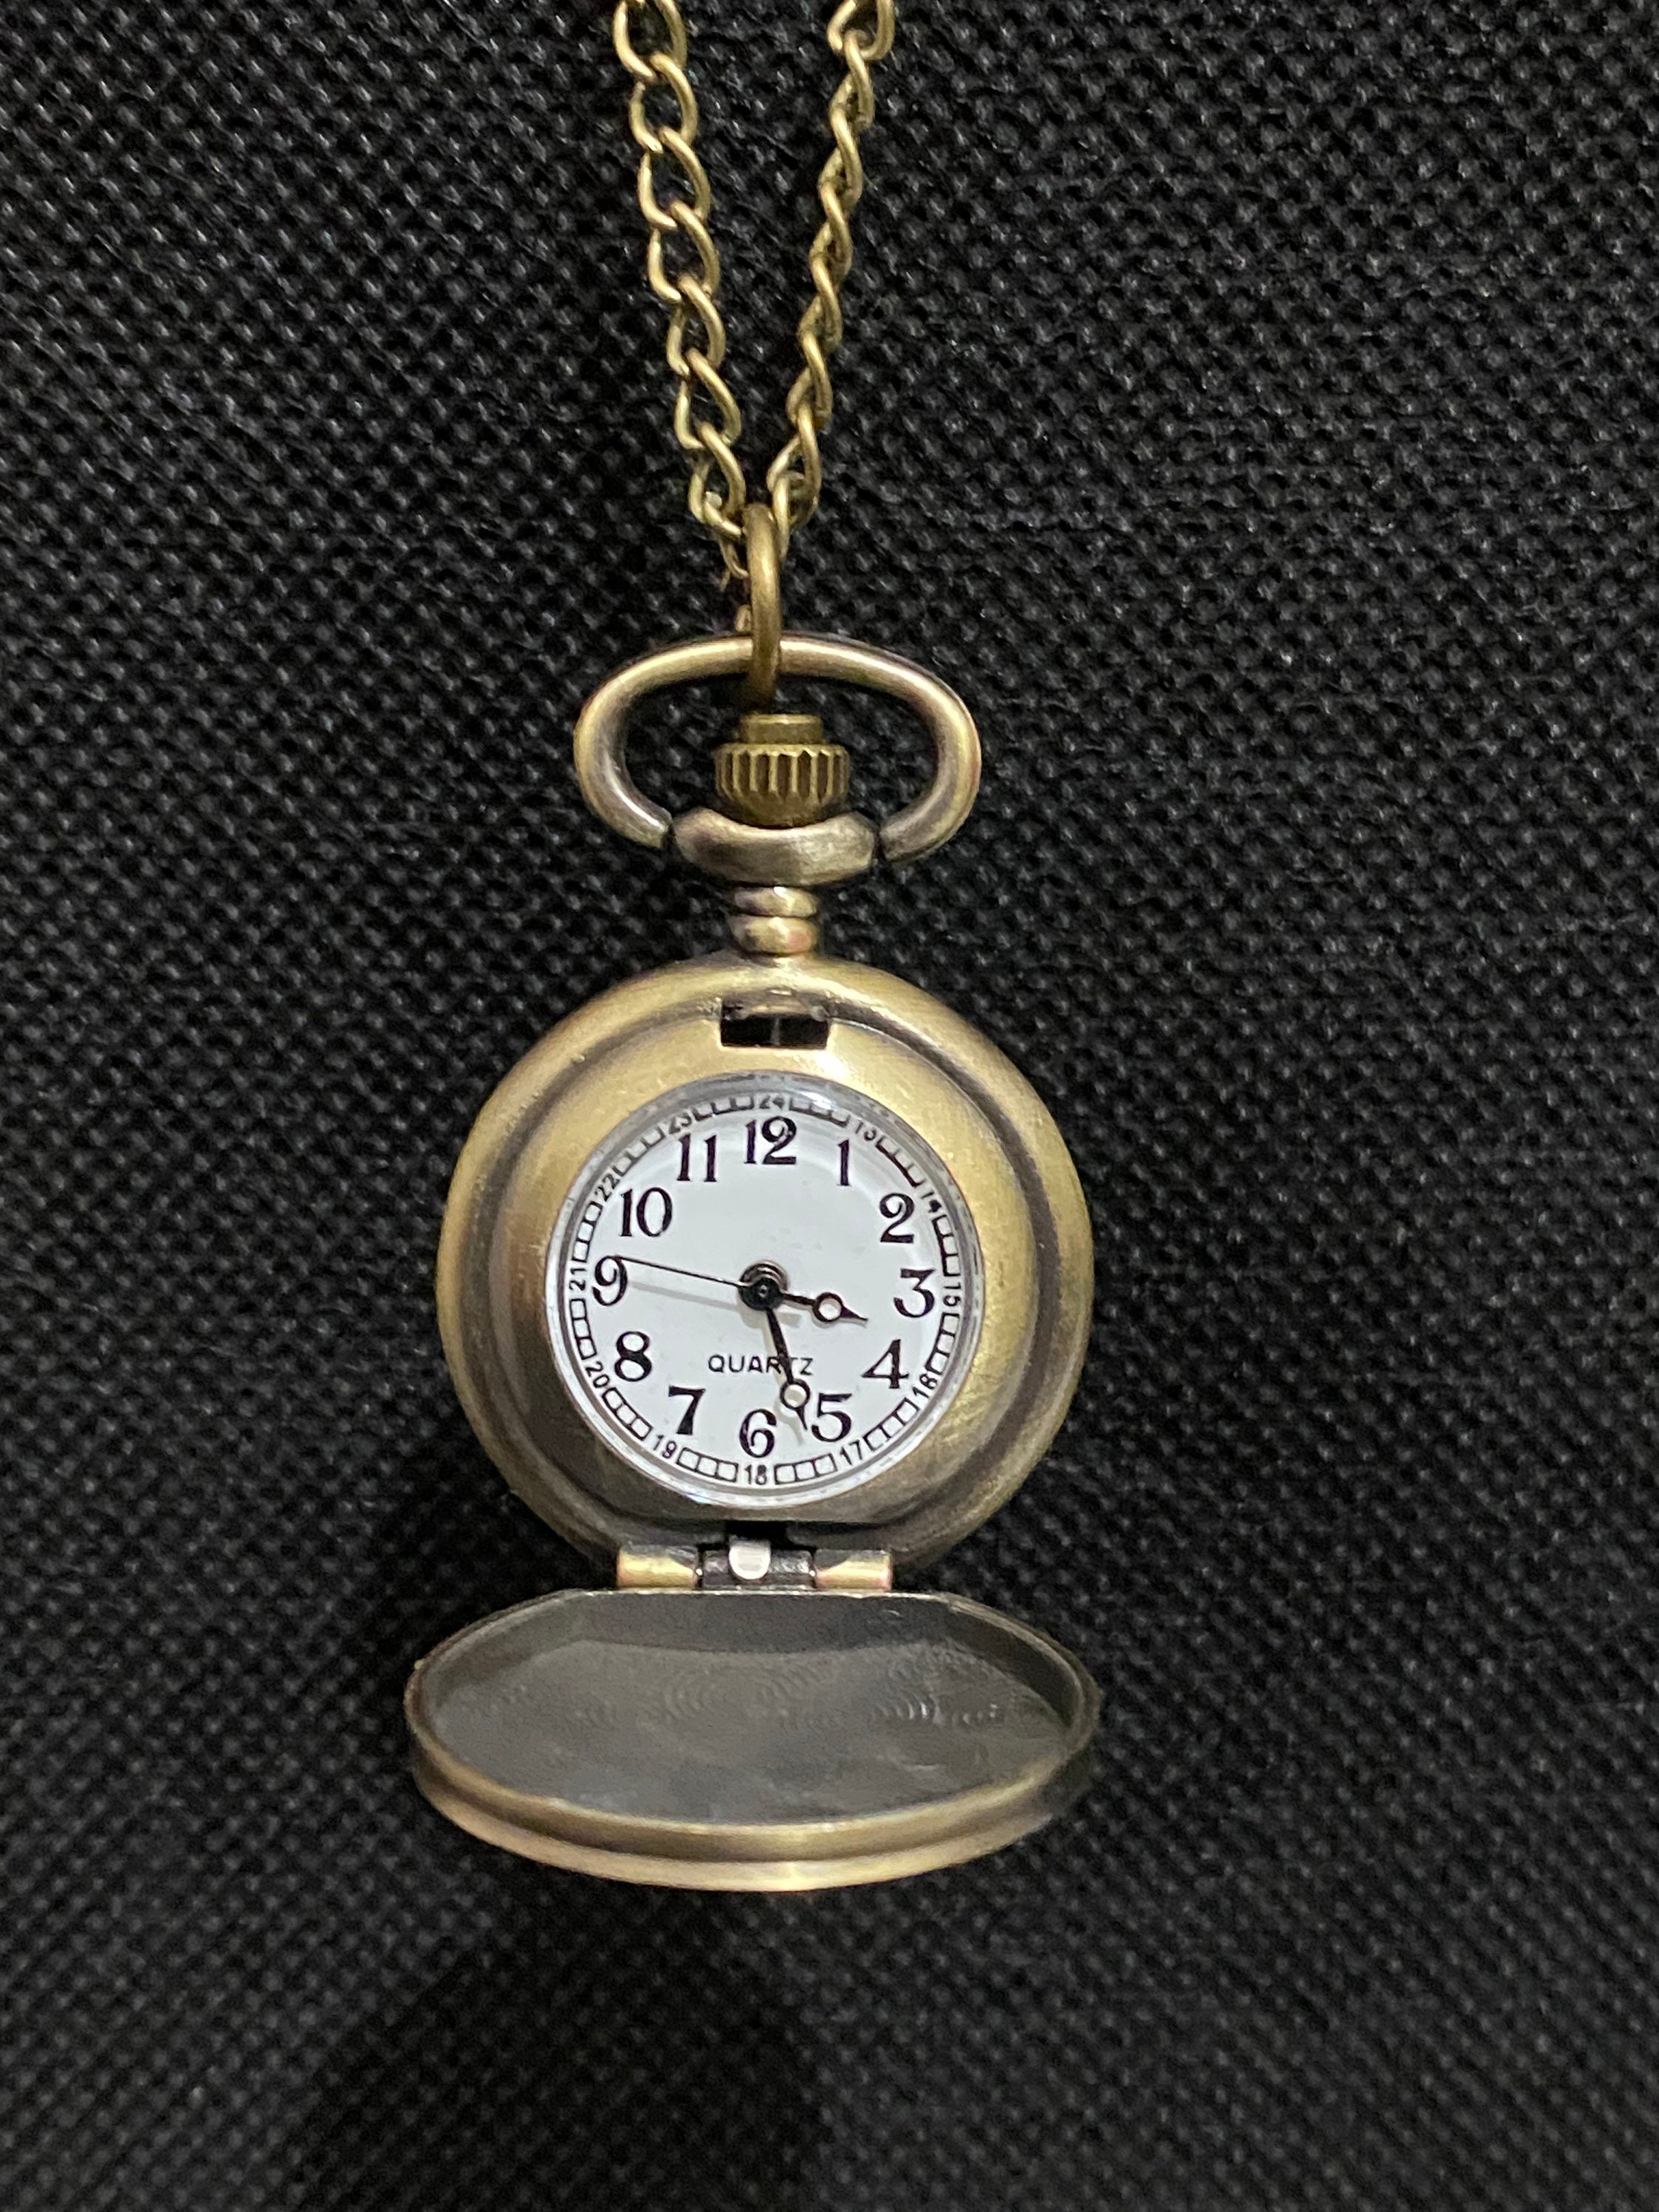 Vintage Pocket Watch Time Display Clock Necklace Chain Watch - Etsy UK